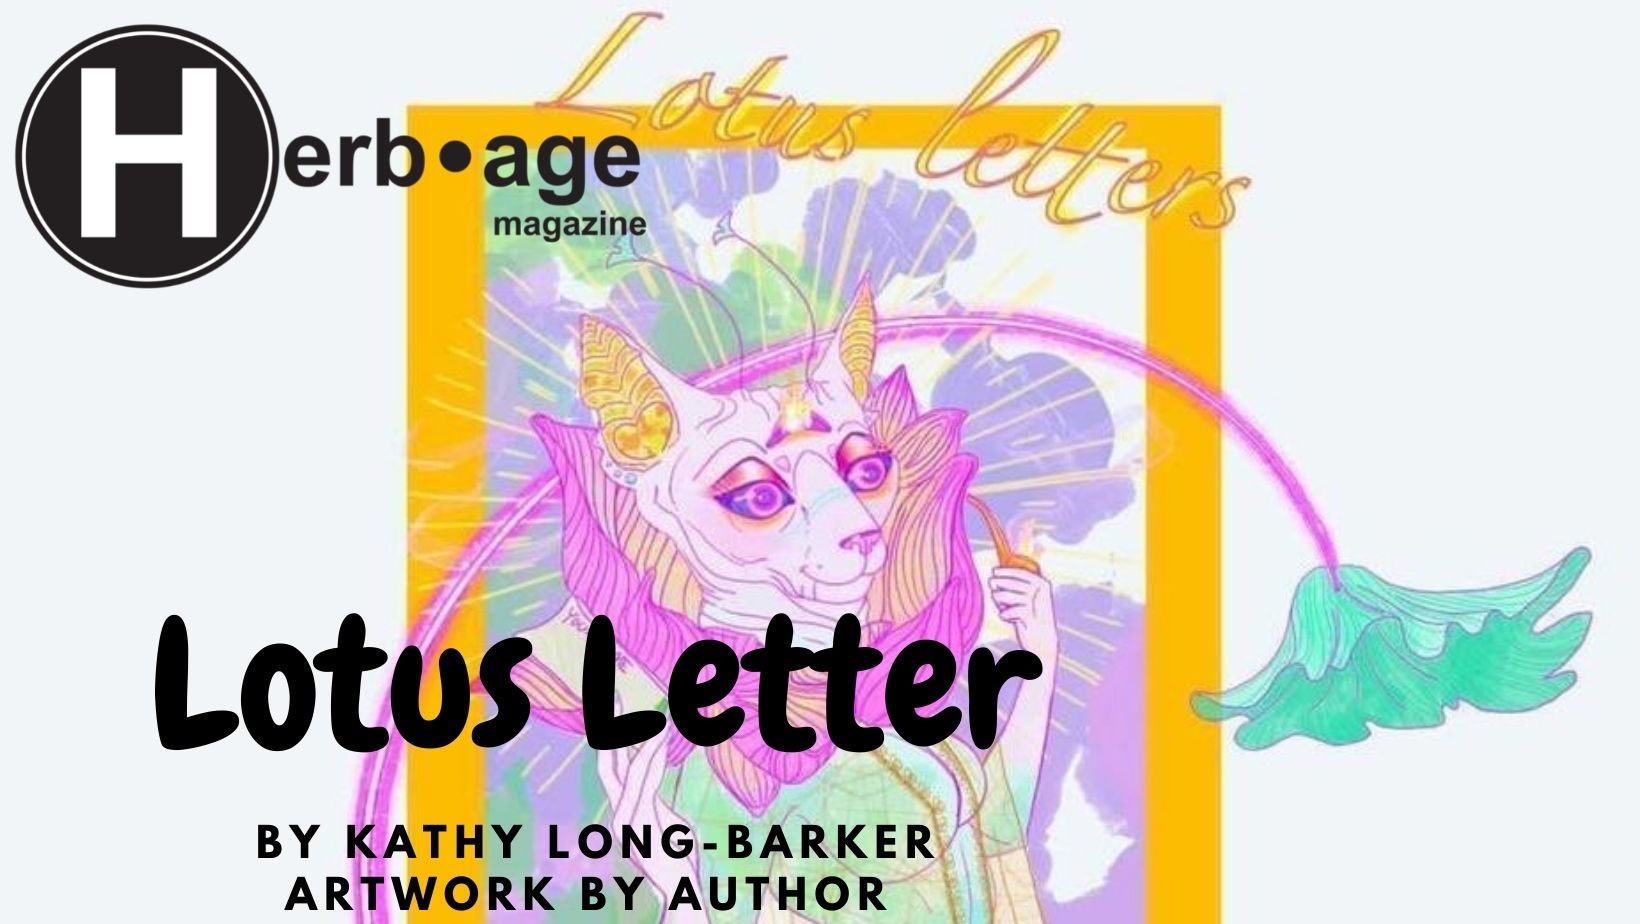 Lotus Letters: Mysterious ways